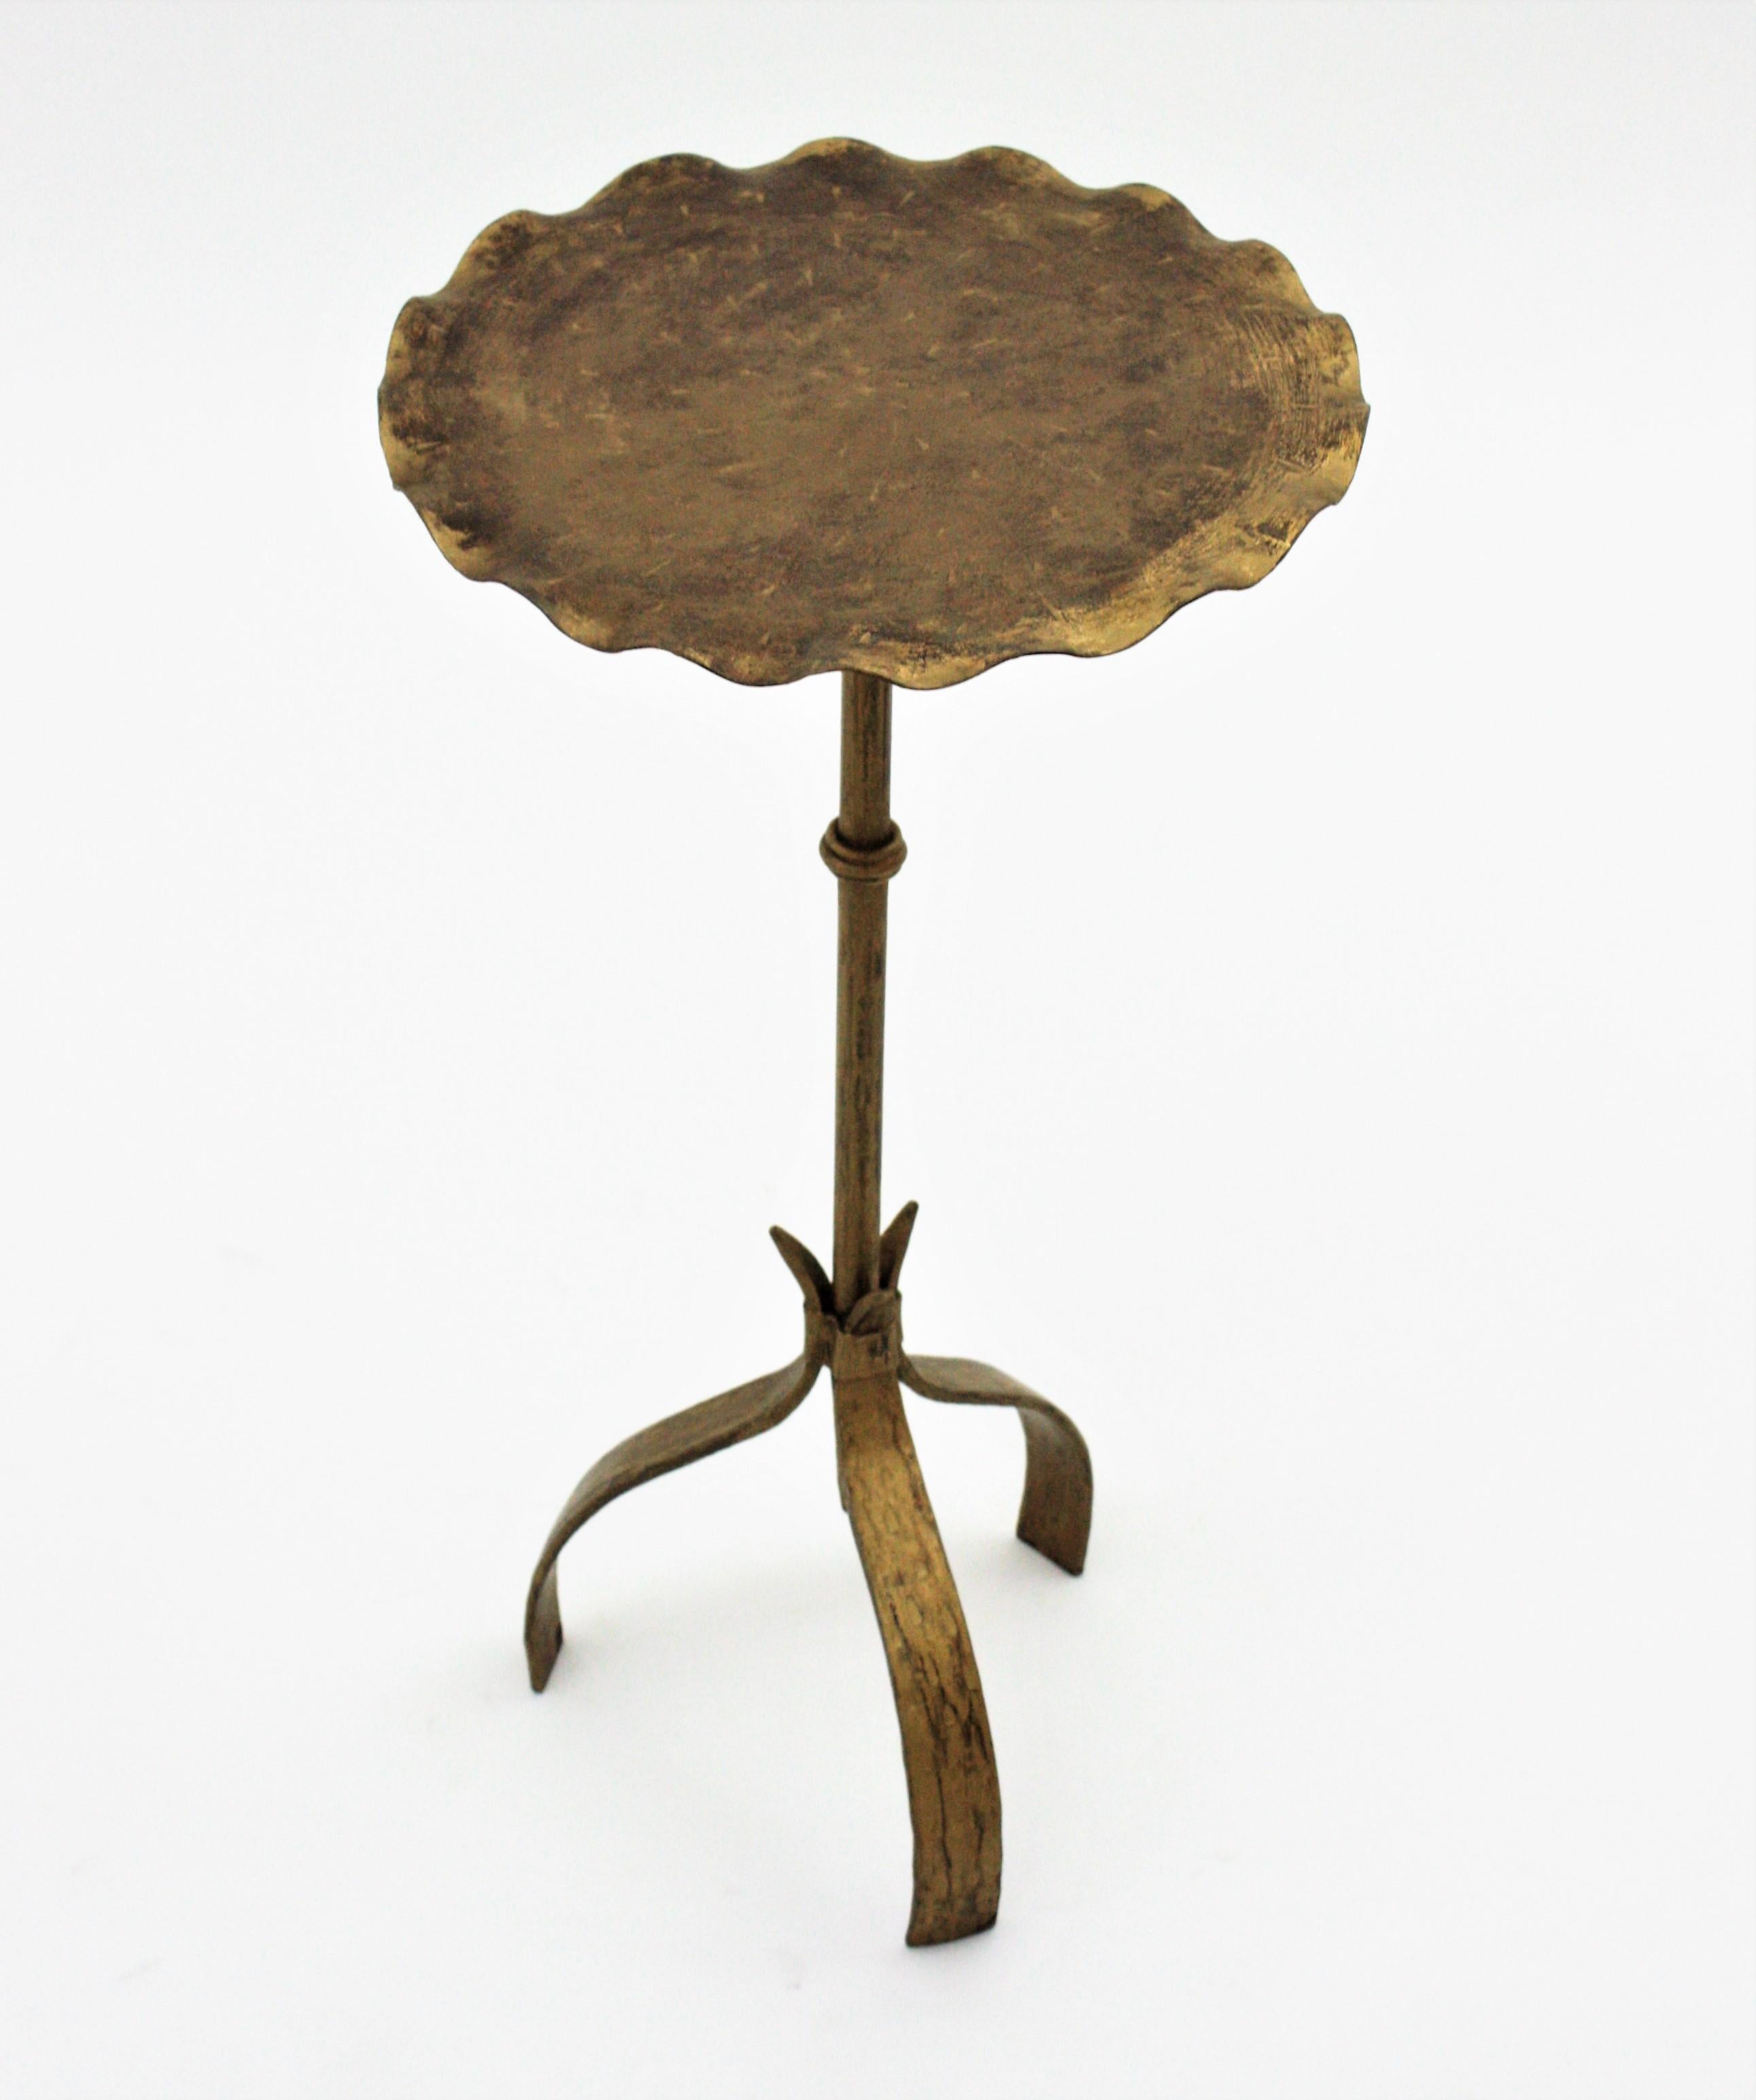 Spanish gilt wrough iron drinks table gueridon, end or side table. Manufactured in Spain, 1950s.
This pedestal table has a round top with wavy edge heavily decored by the hammer work. It stands on a tripod base with a ring detail at the stem .